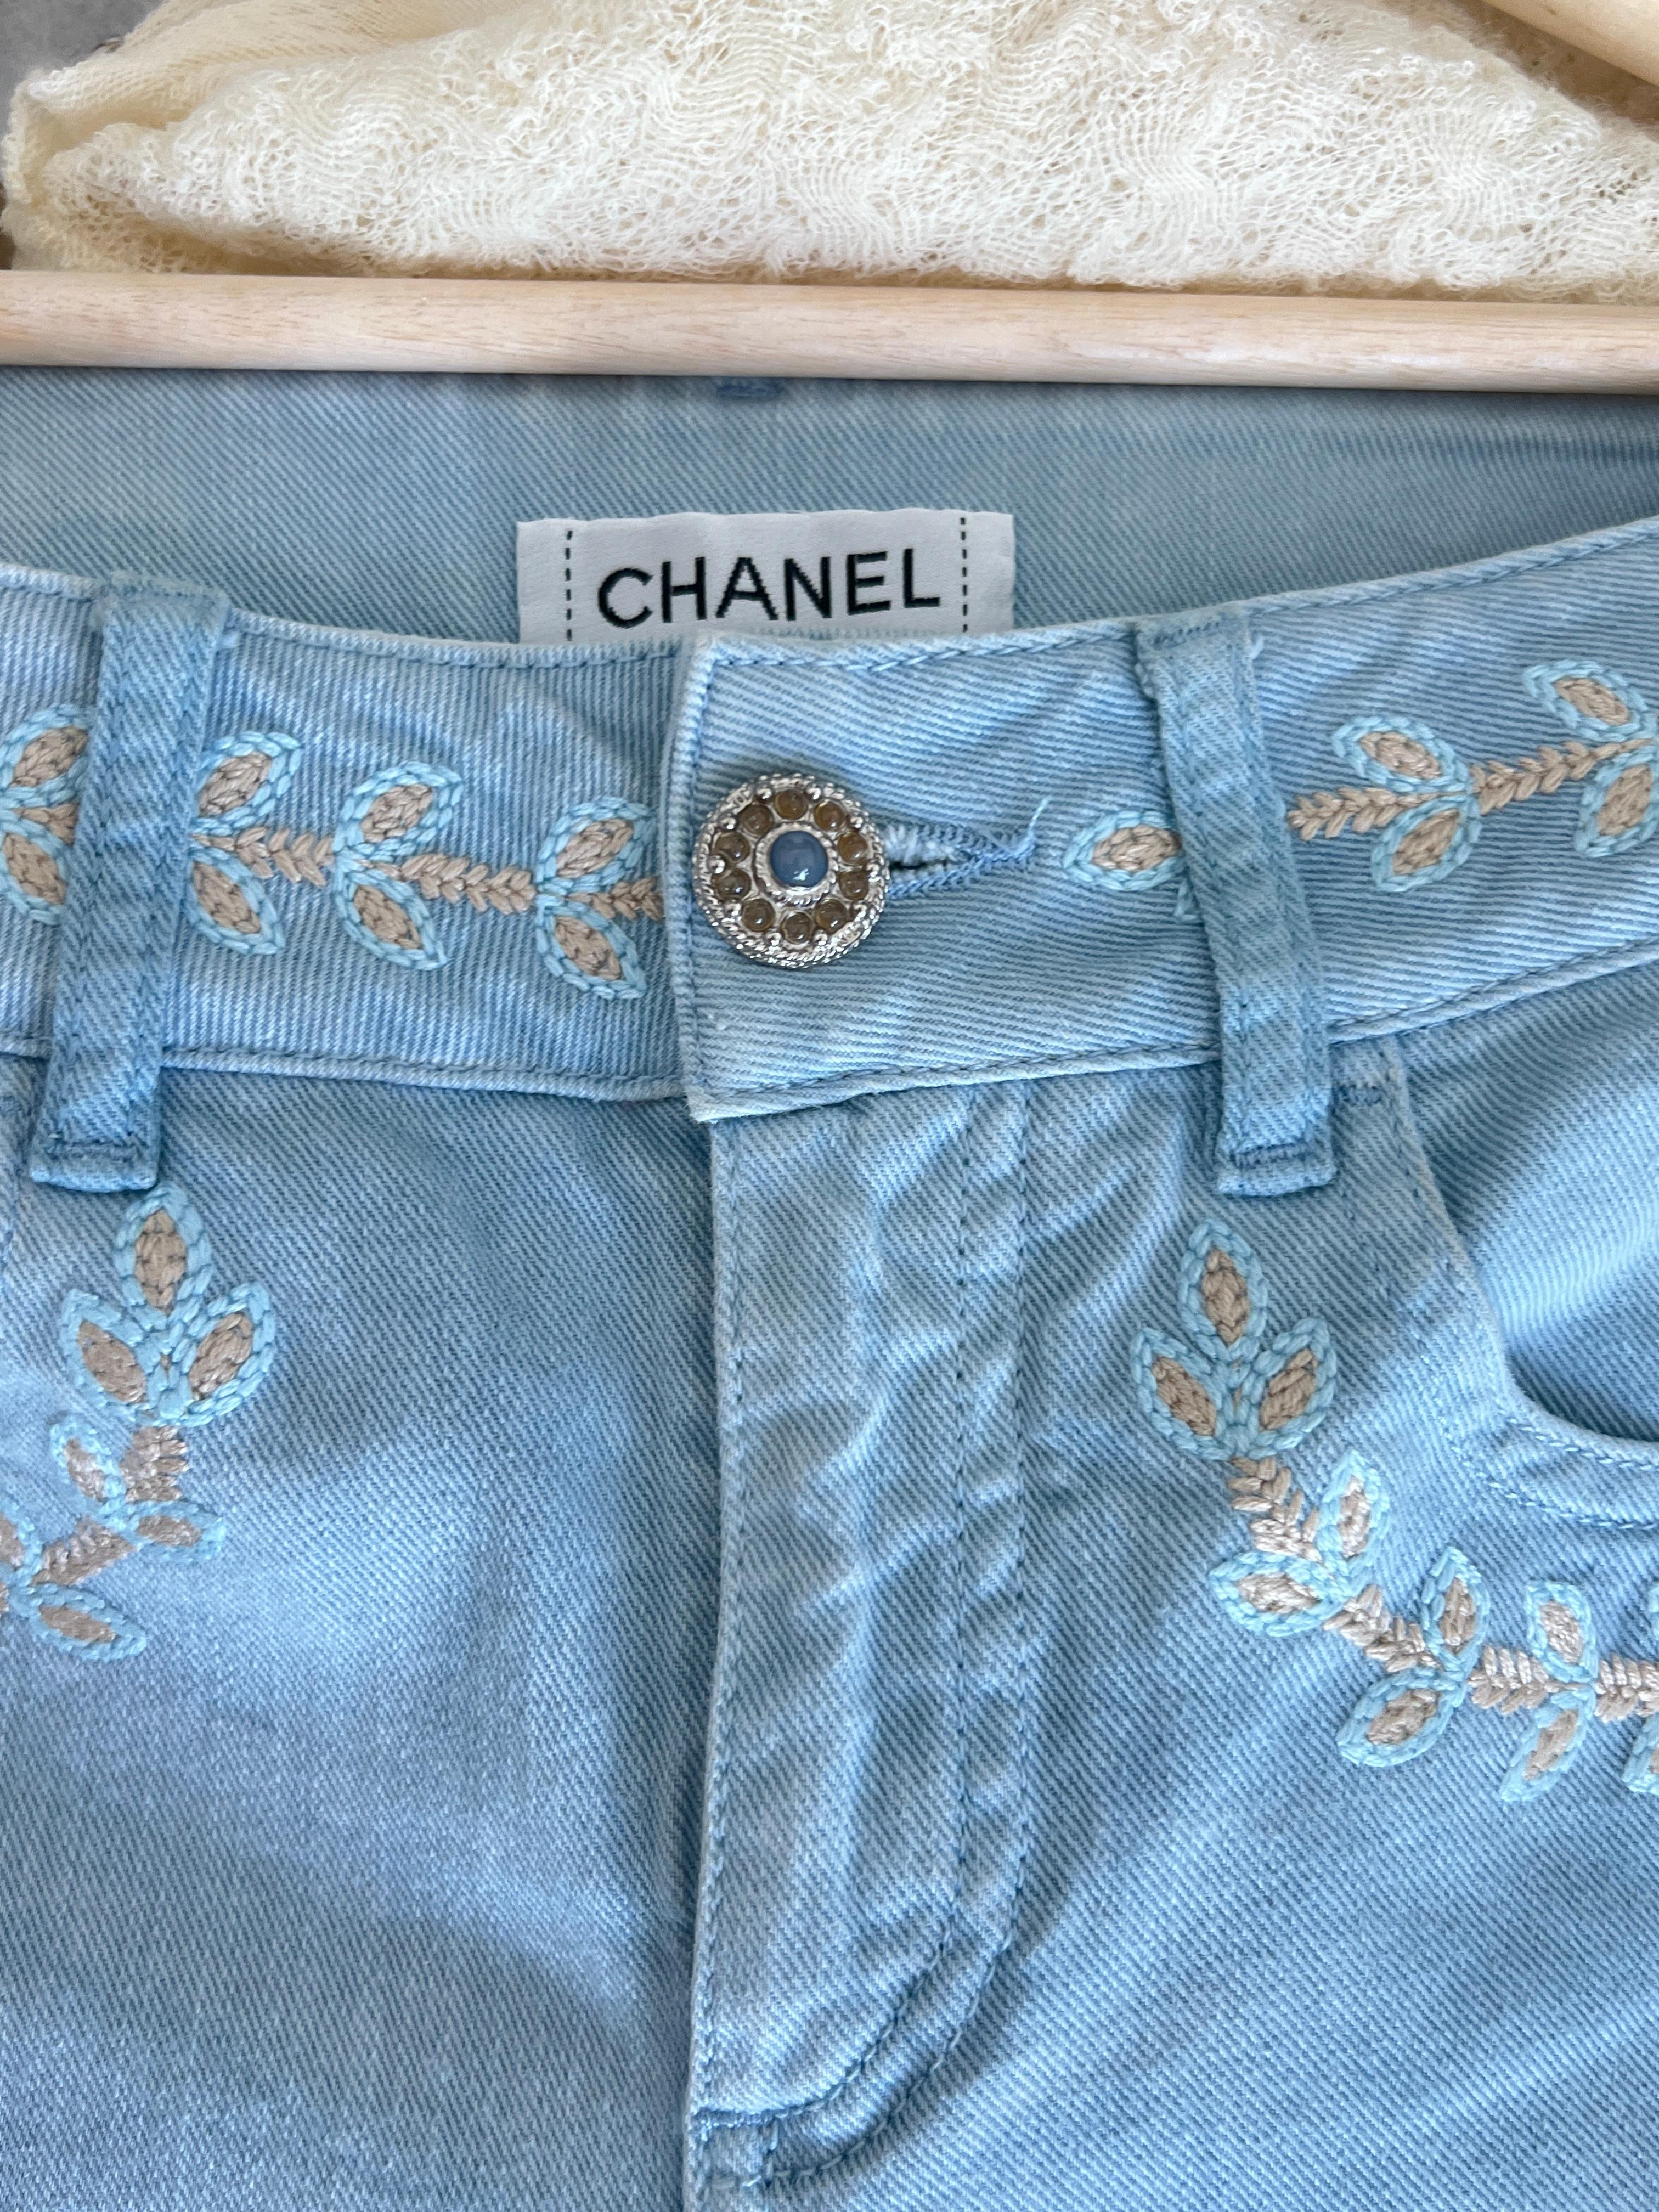 Chanel New CC Logo Embroidery Runway Jeans For Sale 1